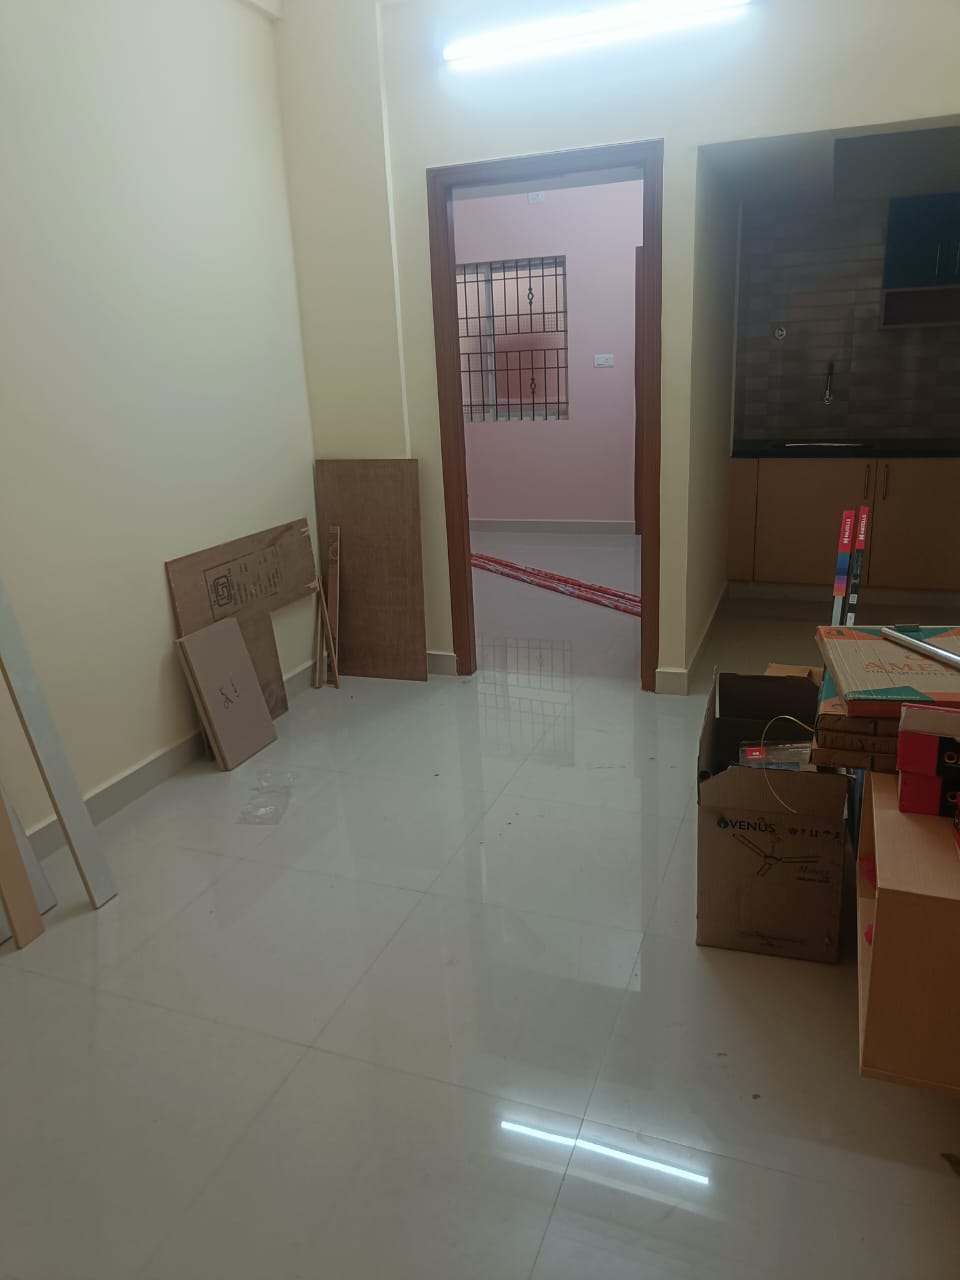 2 BHK Independent House for Lease Only at JAML2 - 4137 in Mahadevapura